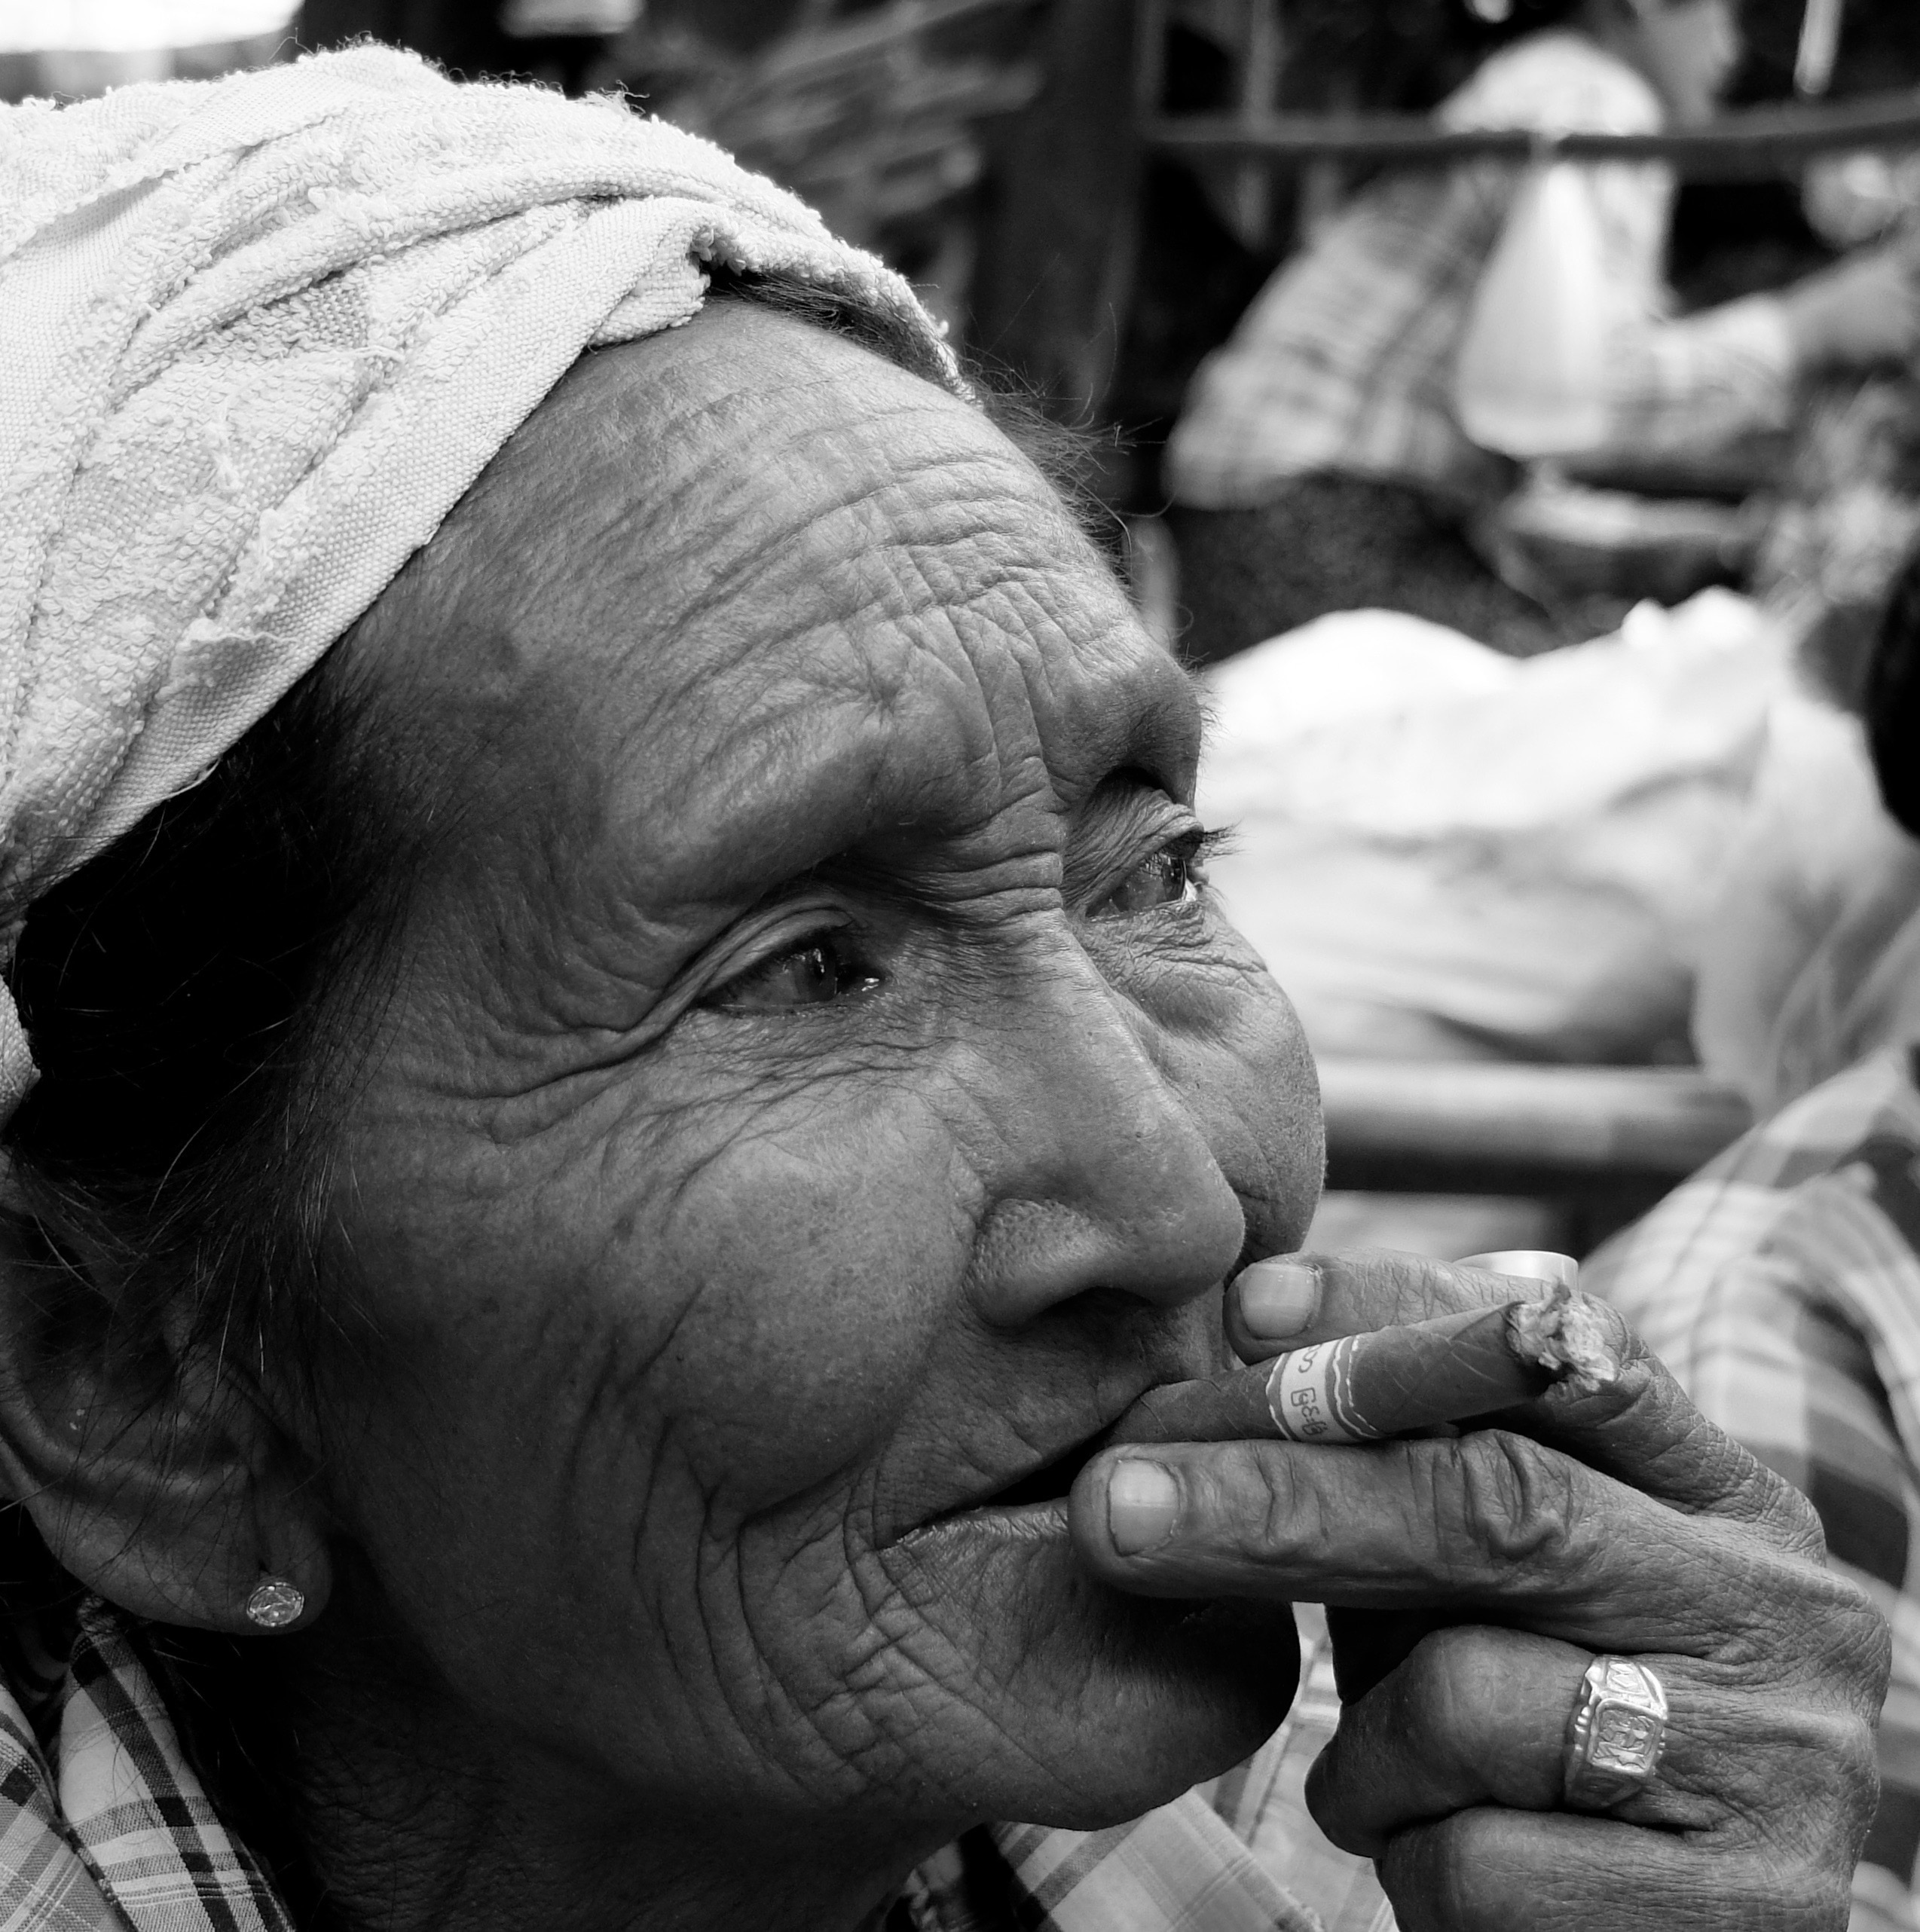 grayscale photography of woman puffing tobacco with signet ring